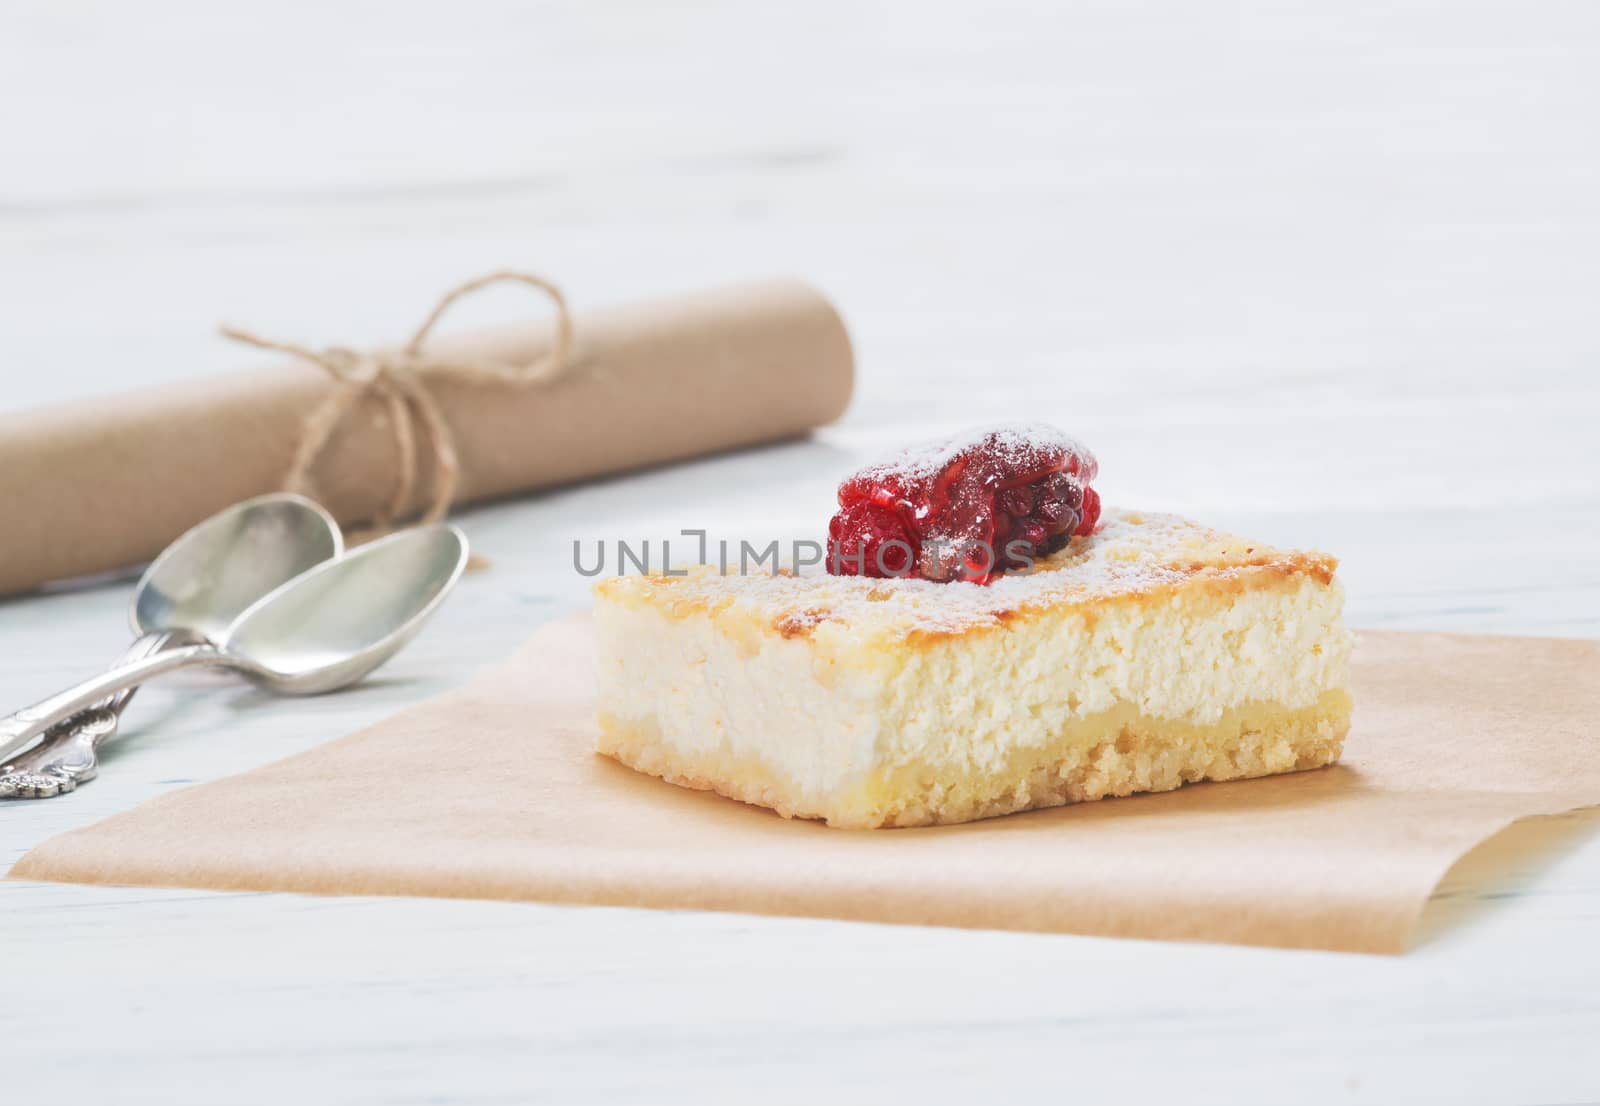 Cheesecake on baking paper on light background